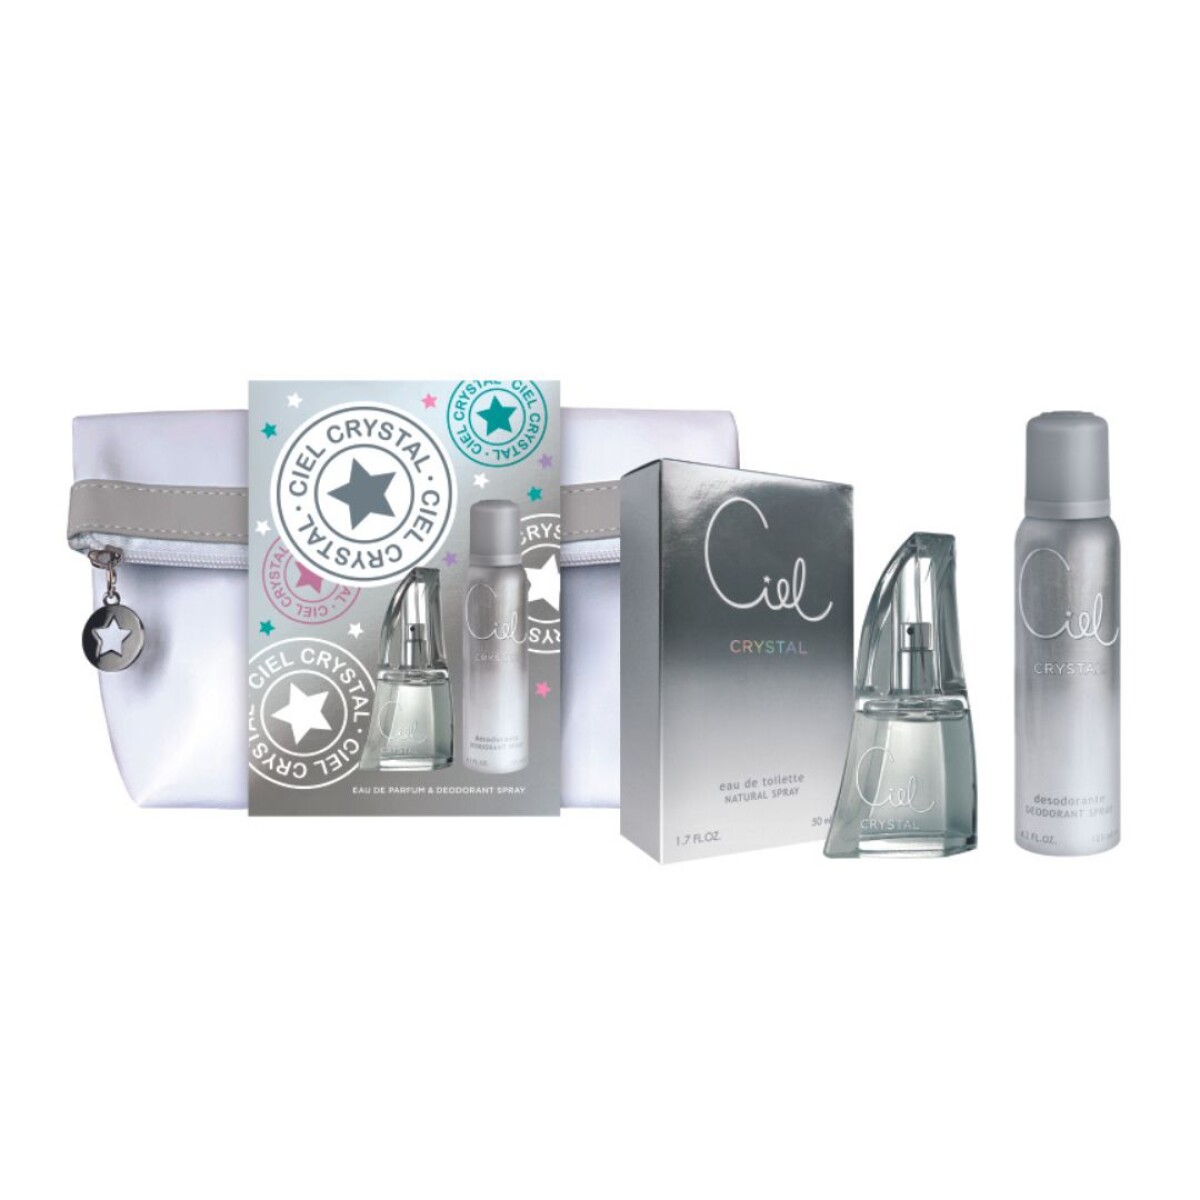 Pack Ciel Crystal Edt 50ml + Deo 123ml + Necessaire 